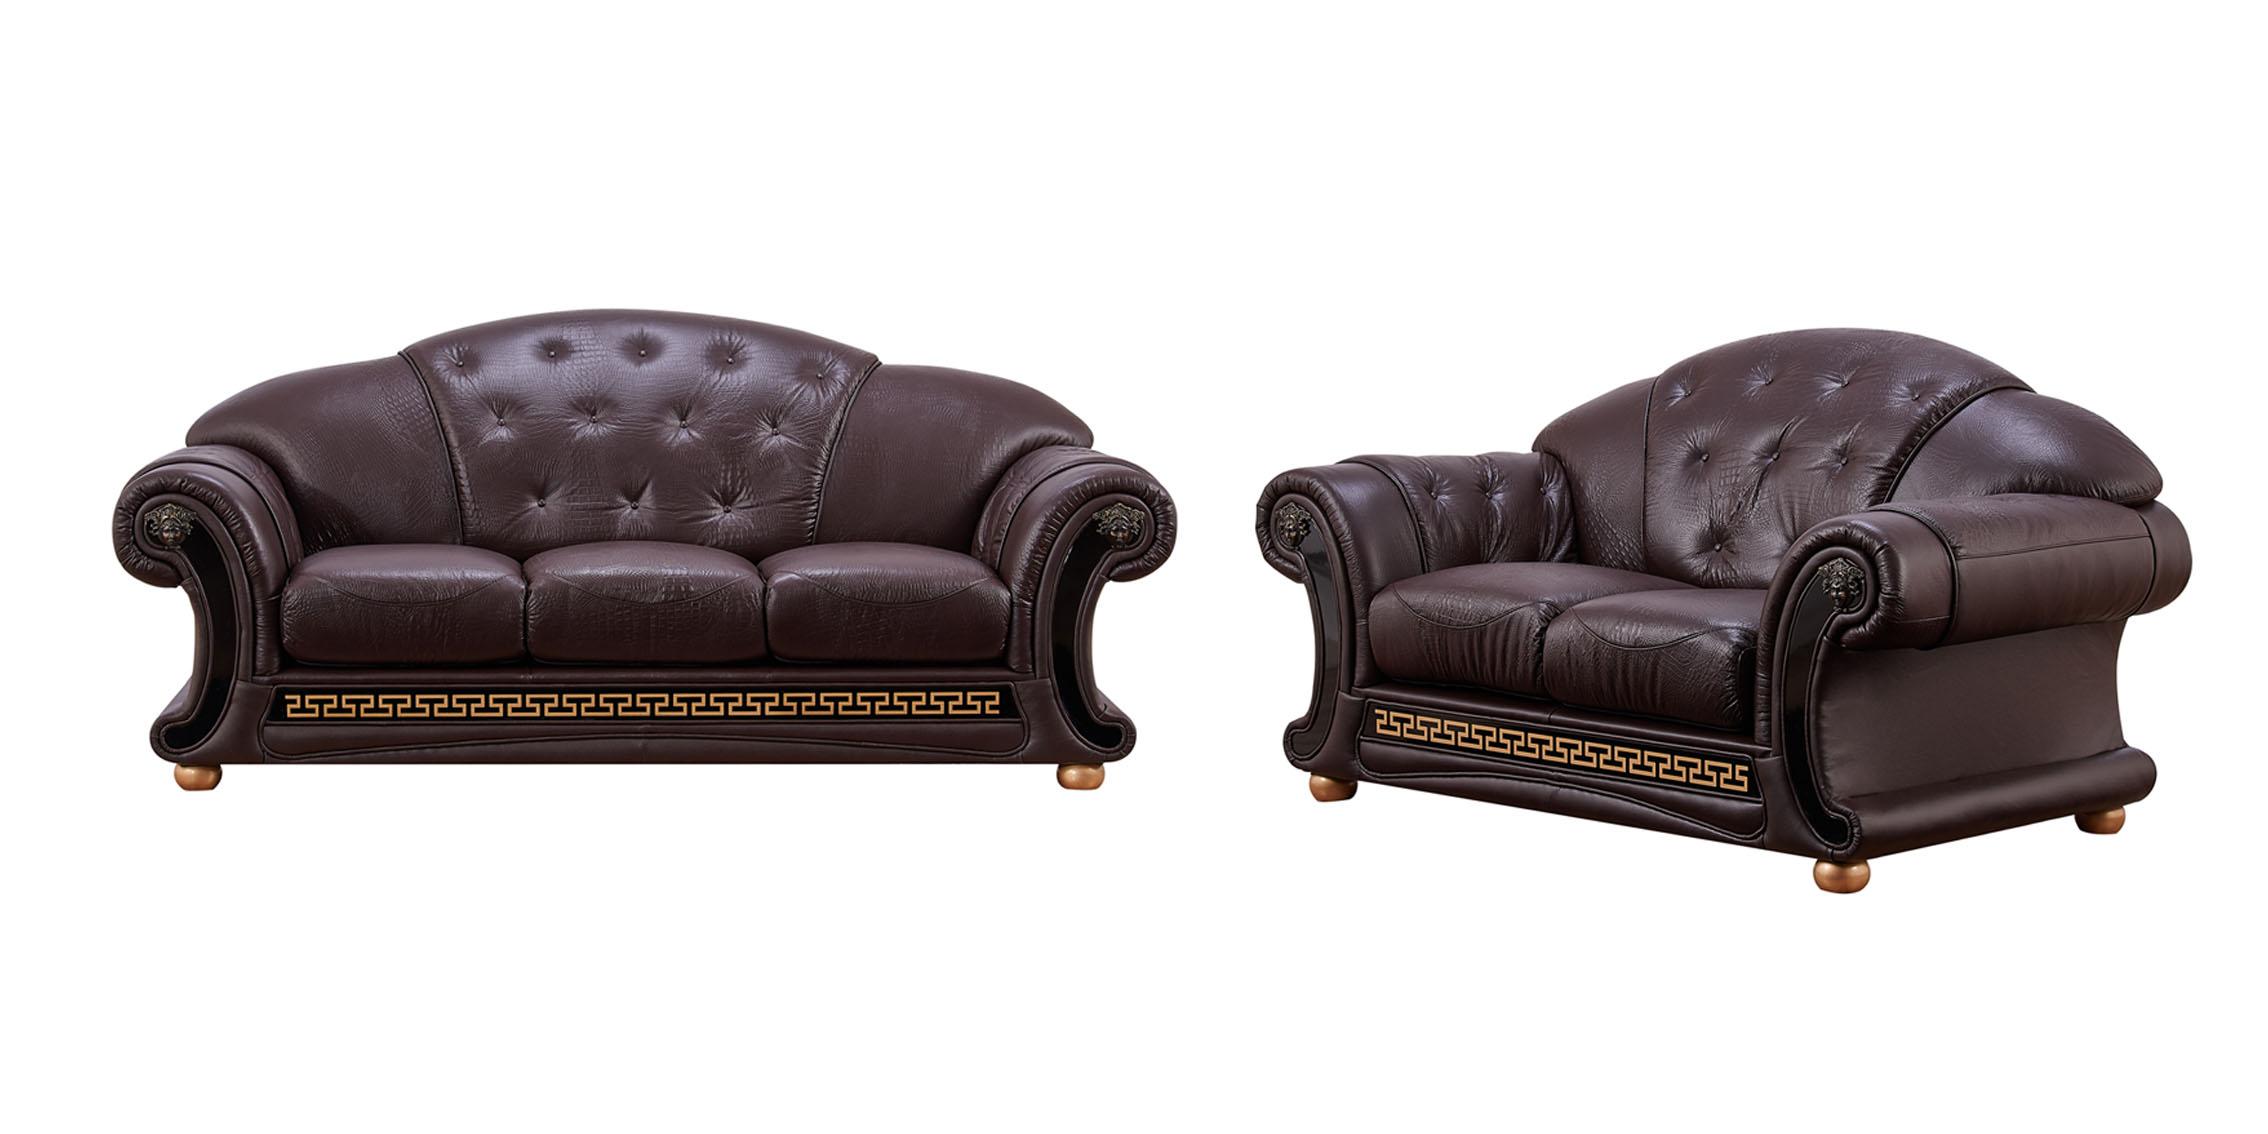 Traditional Sofa and Loveseat Set Apolo ESF-Apolo Brown-2PC in Dark Brown Leather